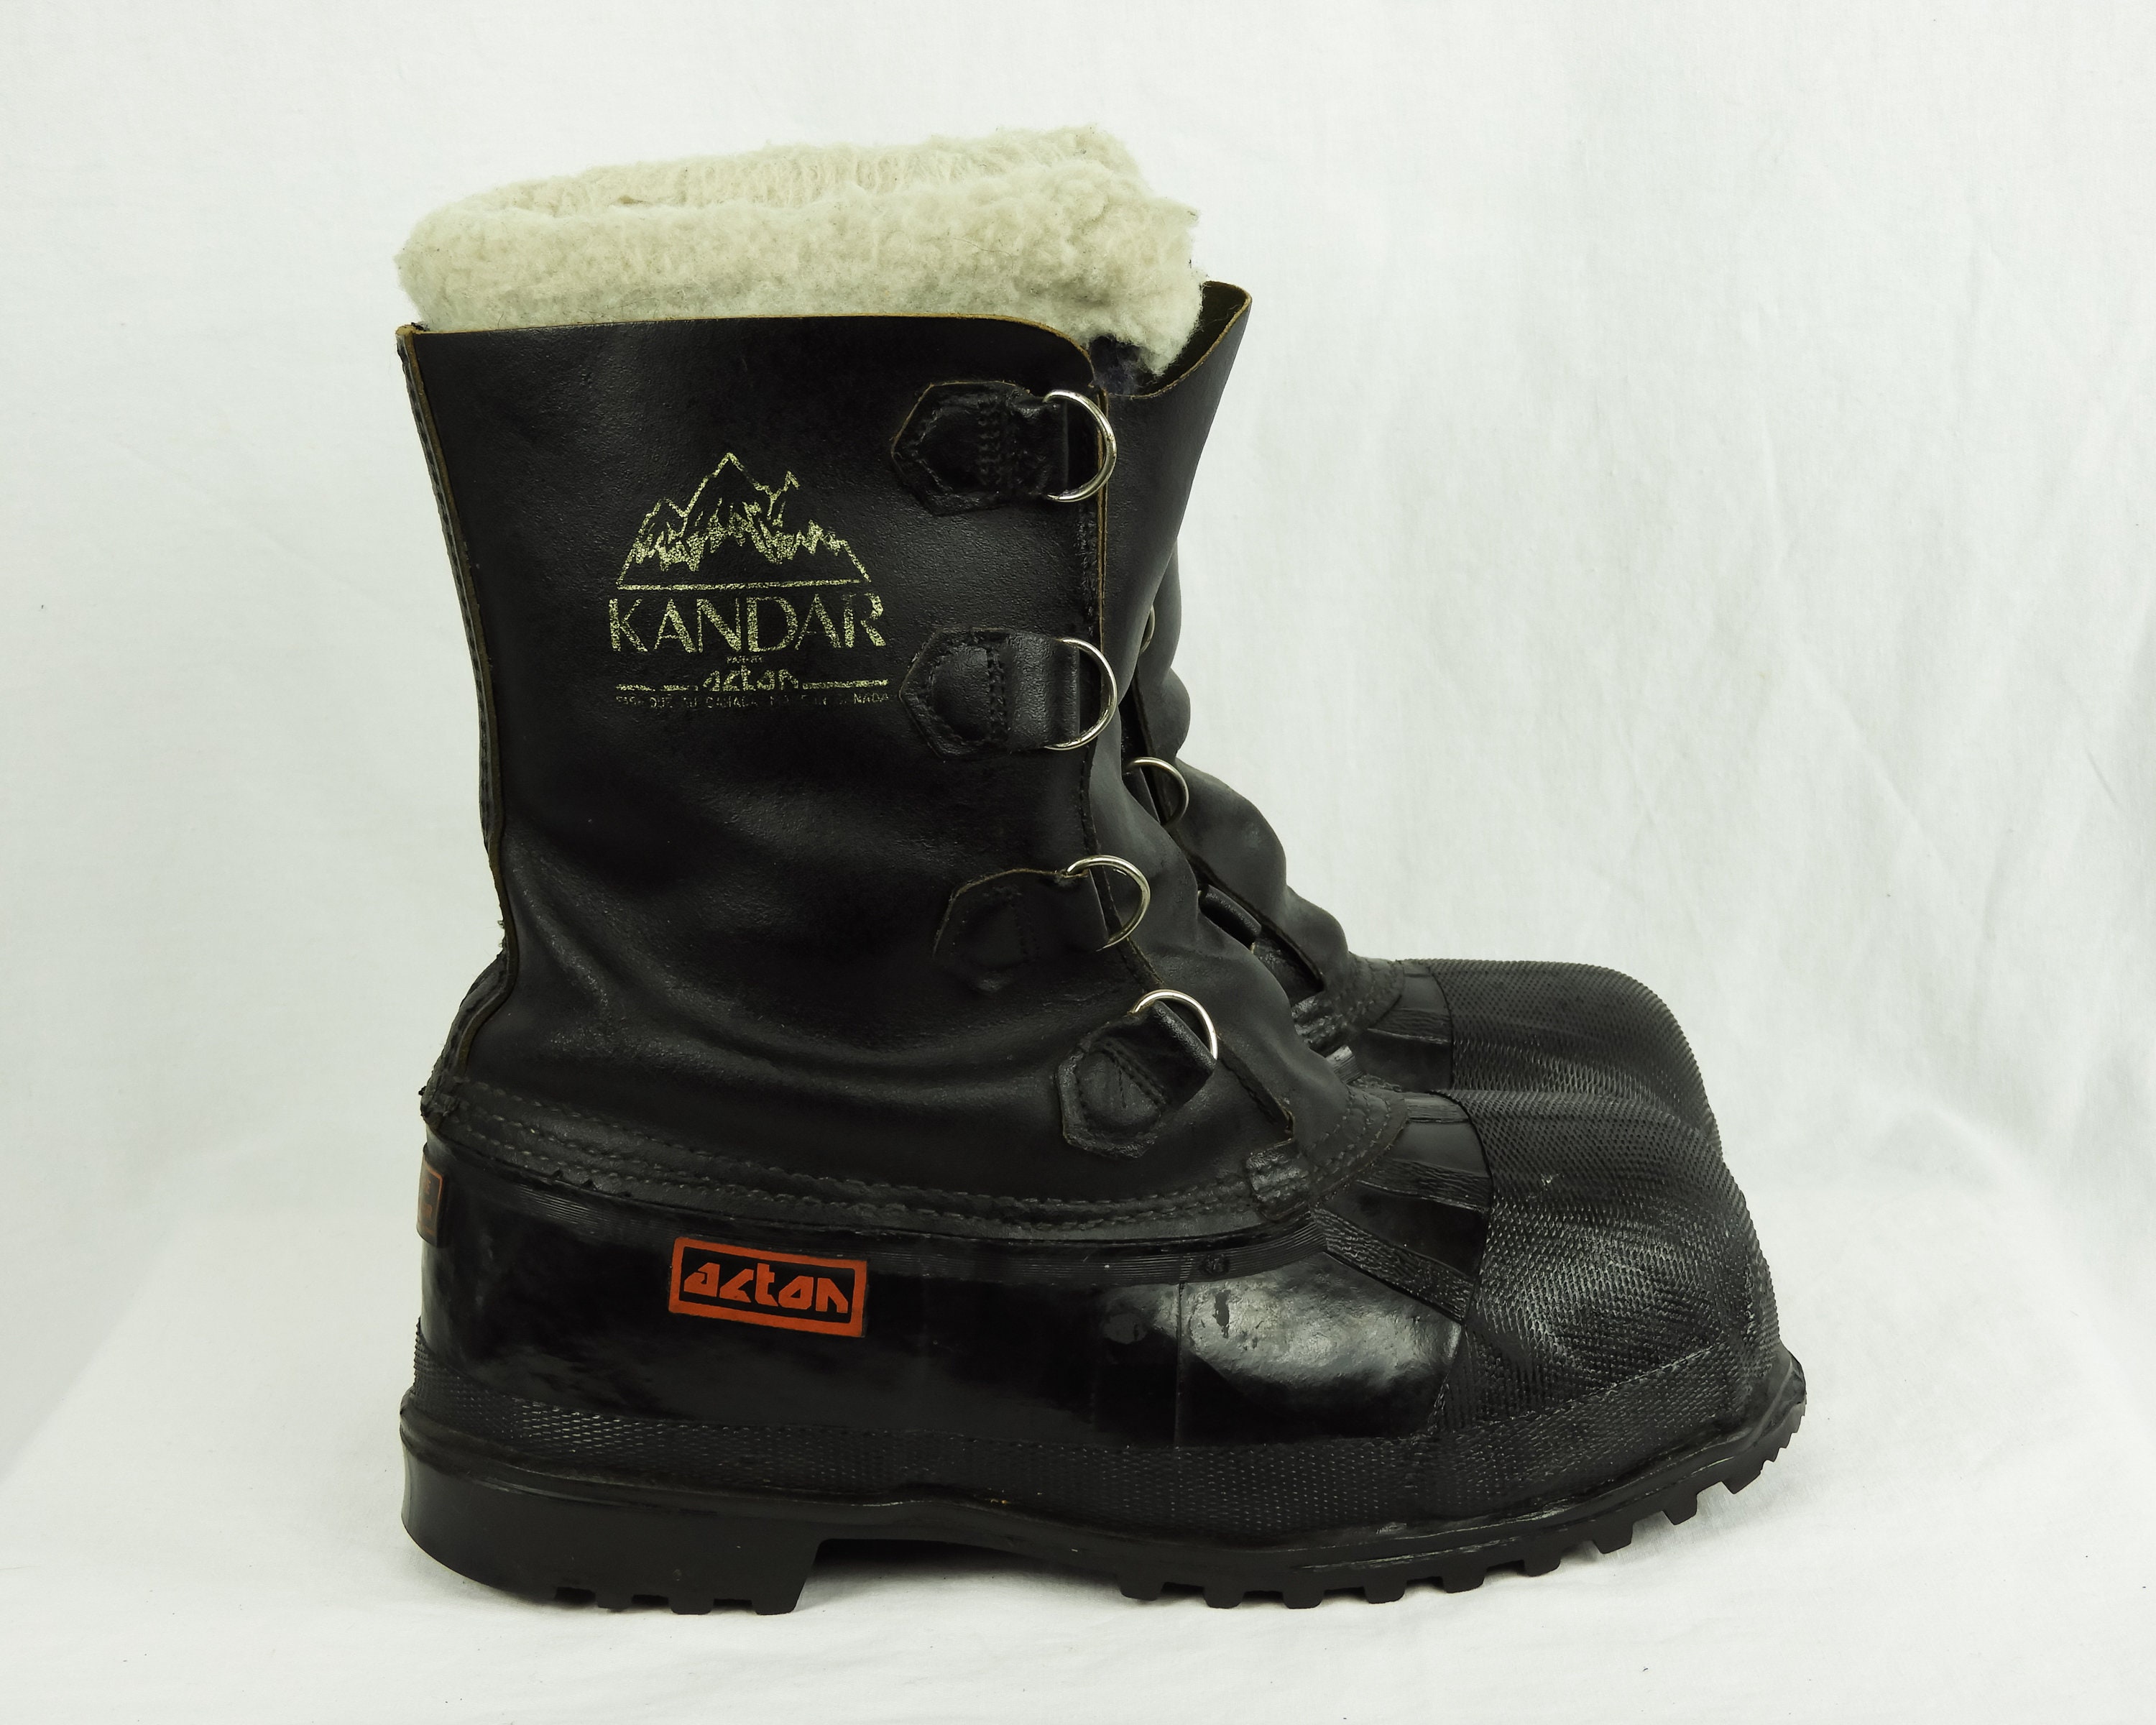 Vintage Winter Boots, Extreme Cold 